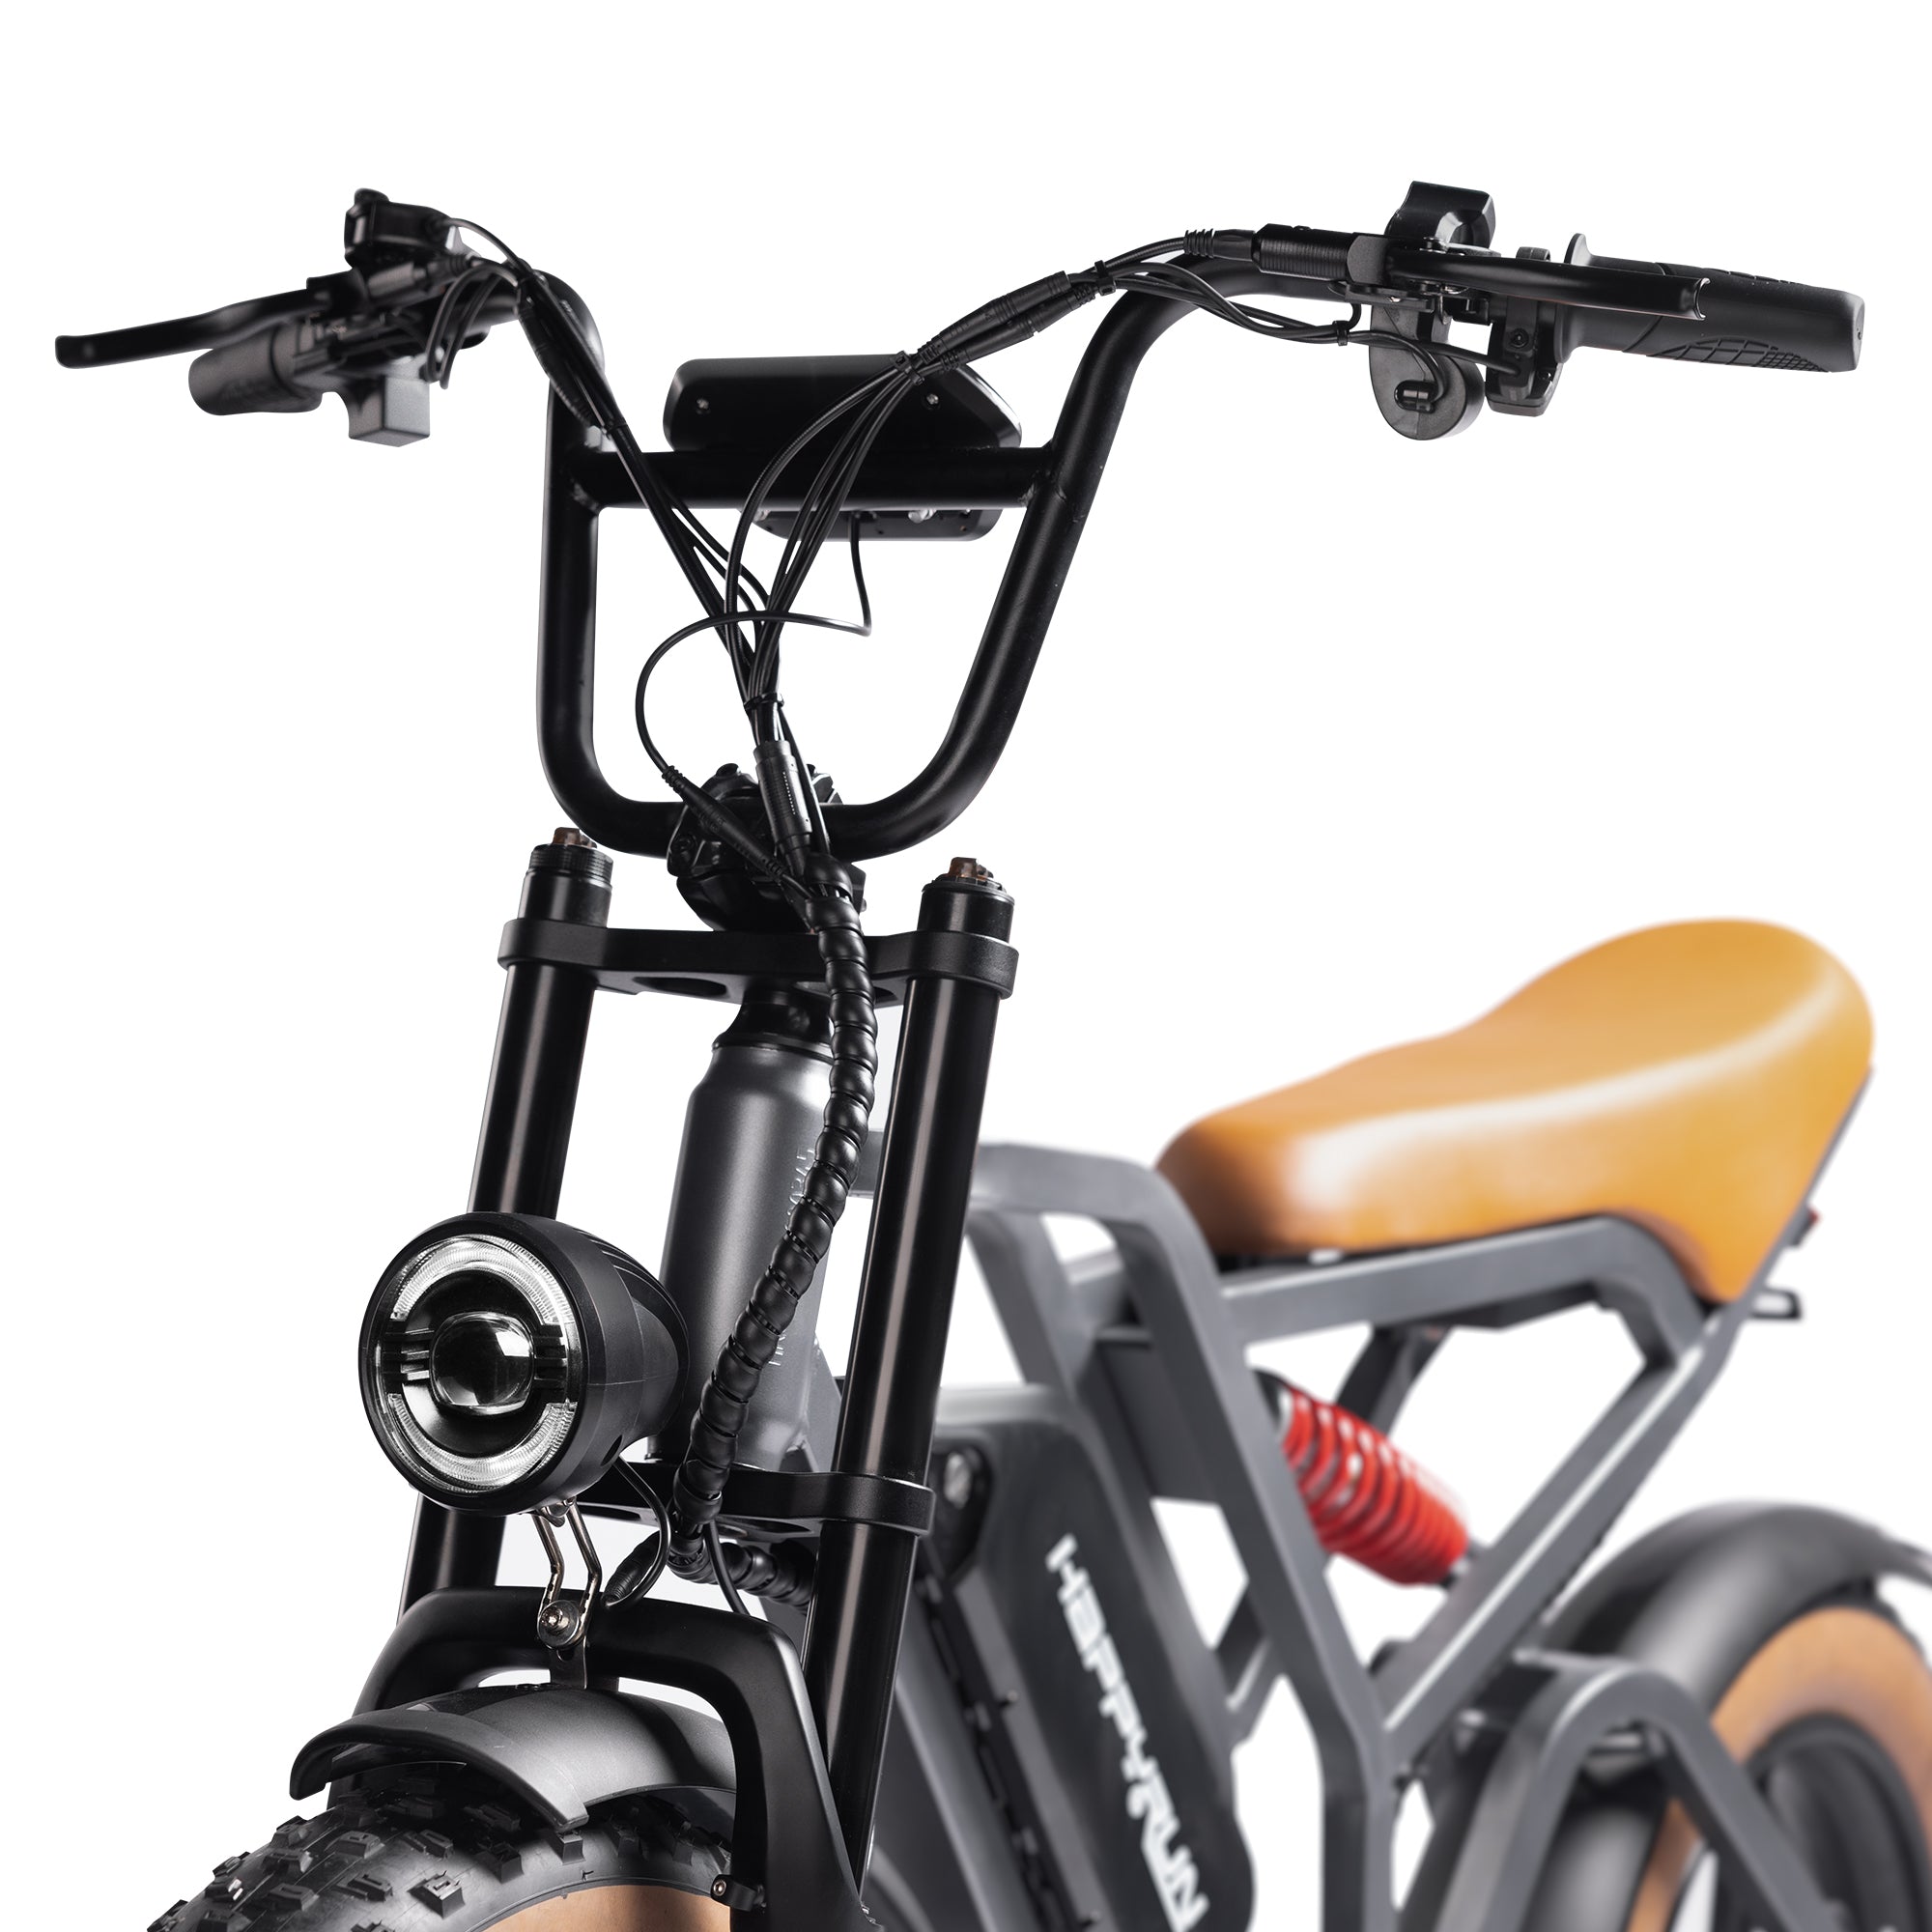 HappyrunSports The Best Fat Tire SUV Electric Bike for Sale